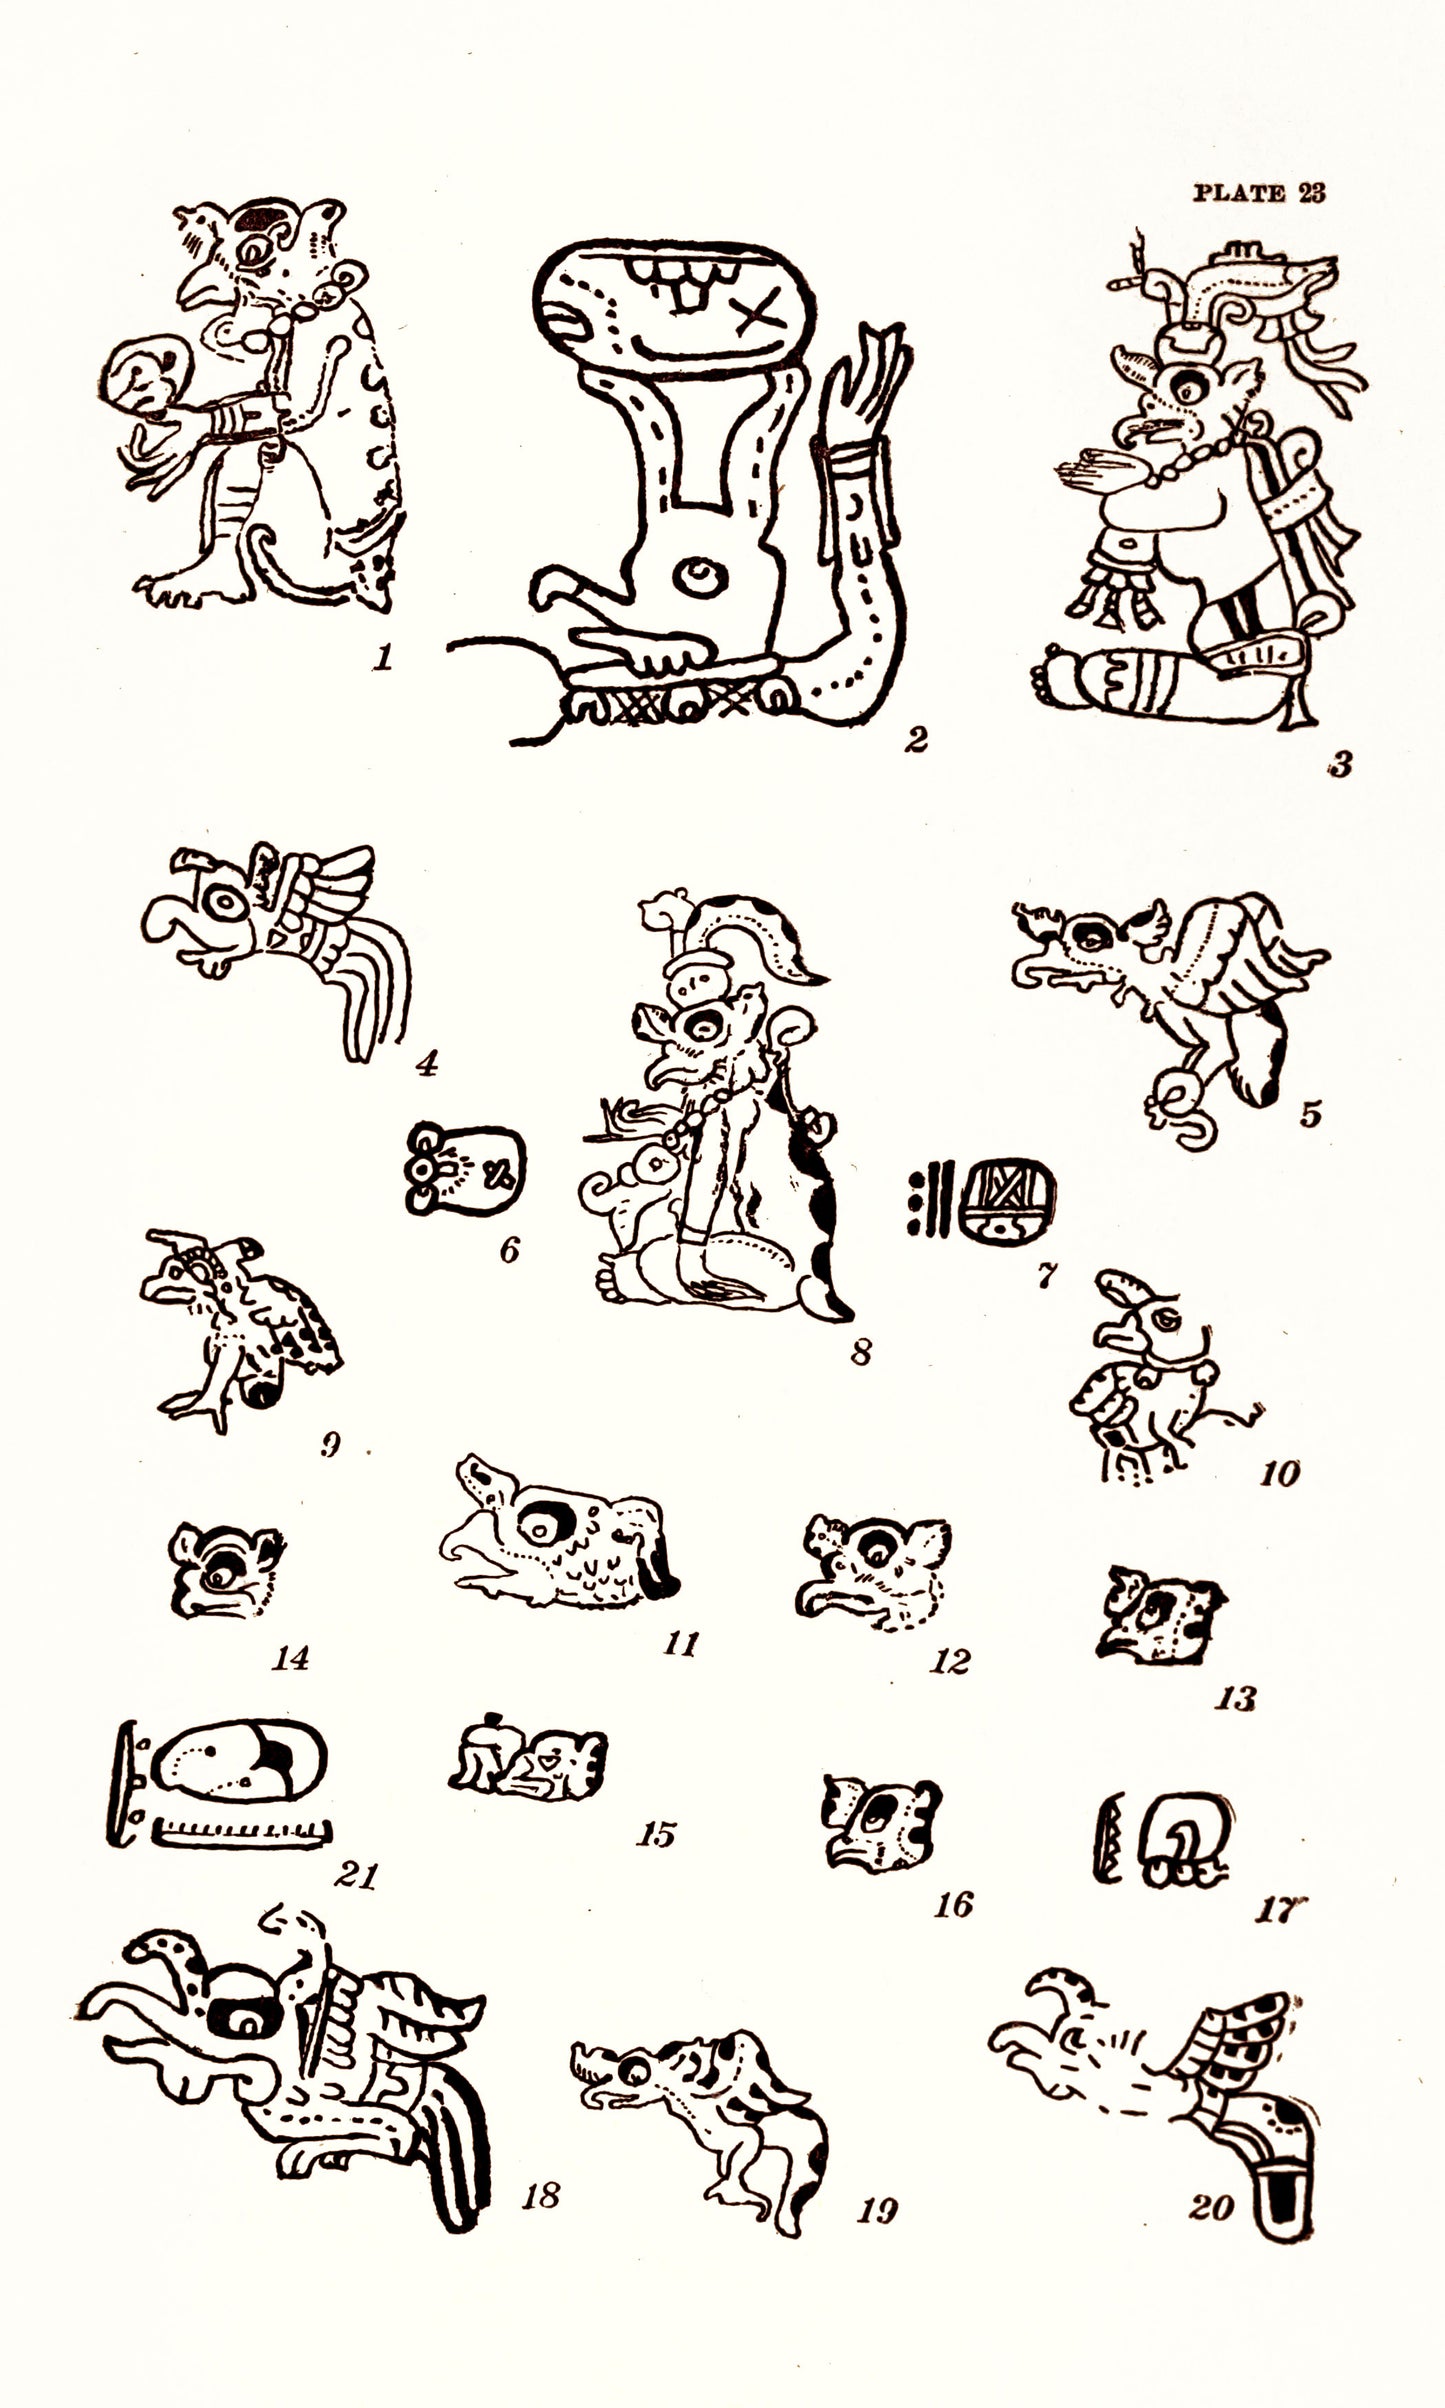 Animal Figures in Mayan Codices [37 Images]